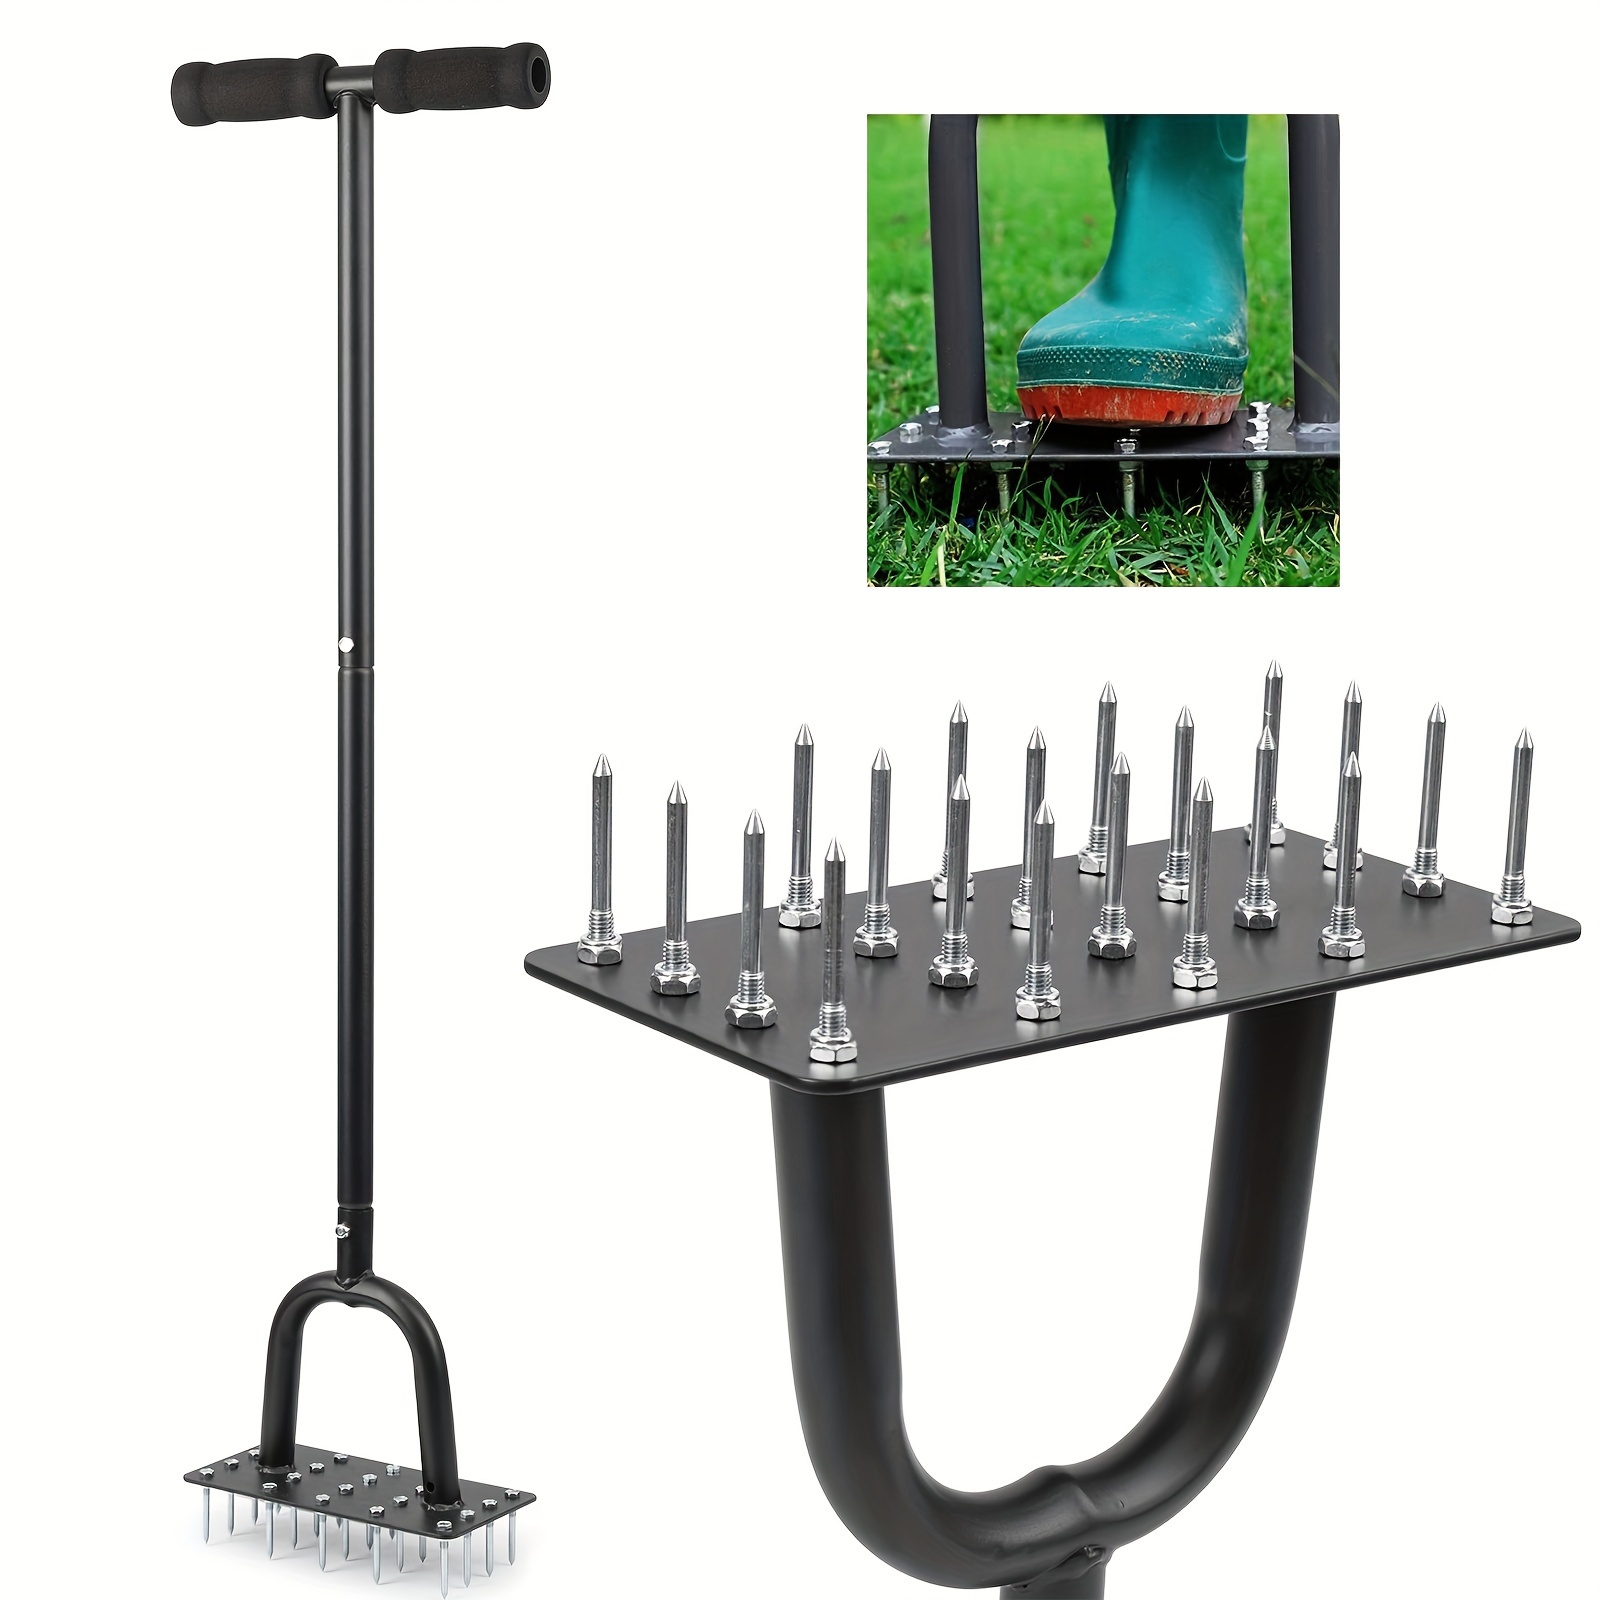 

Heavy-duty Manual Lawn Aerator With 20 Metal Spikes - Pre-assembled Soil Loosening Aerator Tool, Robust Iron Construction, Efficient Grass And Lawn Revival, Garden Yard Aeration Equipment